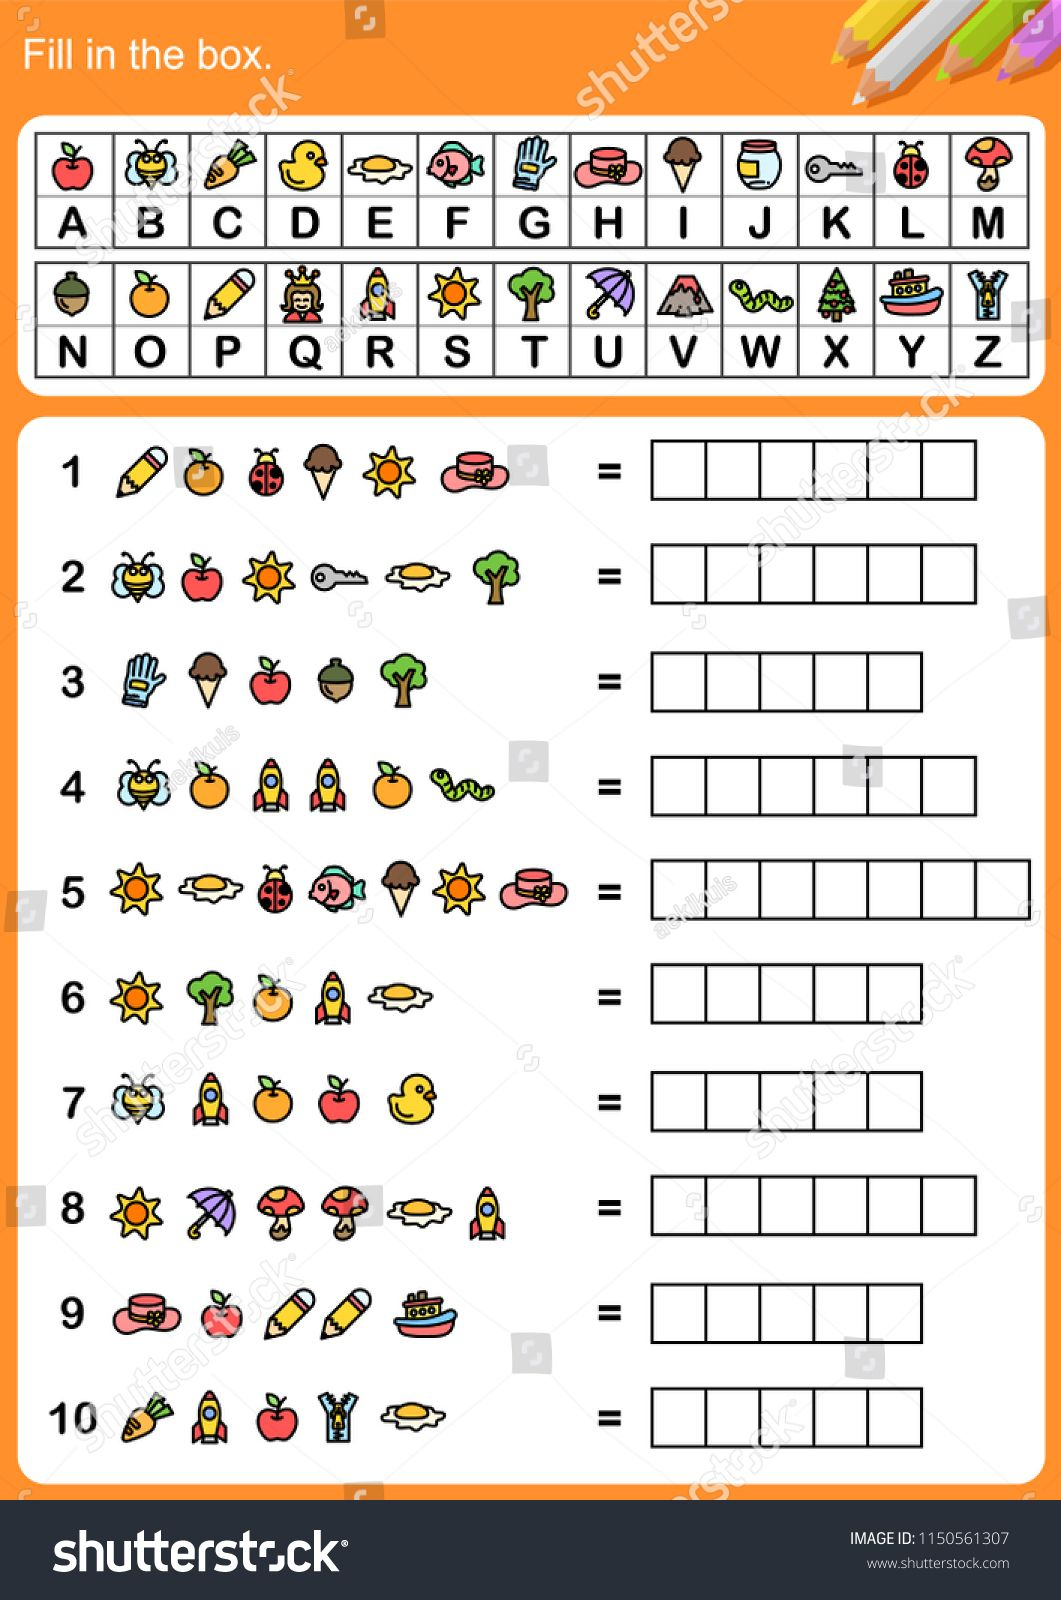 Decode Alphabet, Fill In The Box. - Worksheet For Education. #Ad - Free Printable Decoding Games